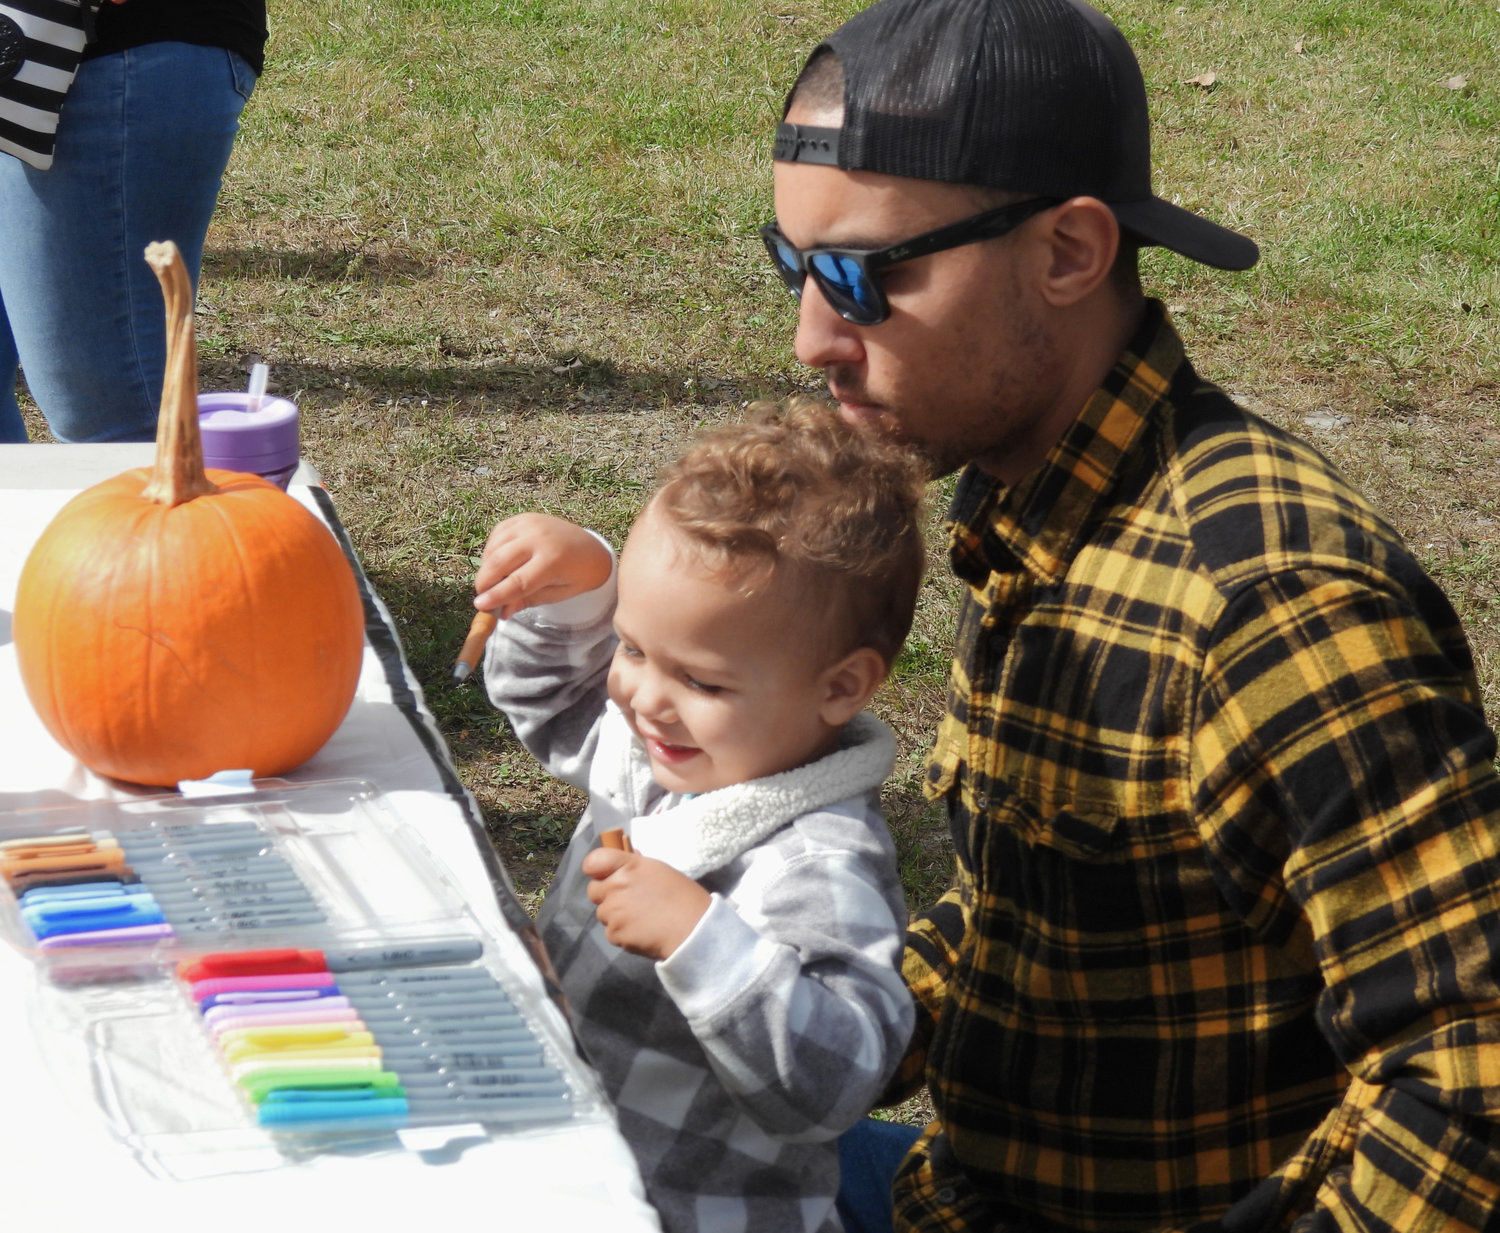 Pictured is Rome resident Anthony Jones helping two-year-old Amelia Jones decorate her pumpkin at the Oneida Fall Fest on Saturday, Oct. 1 in Oneida.